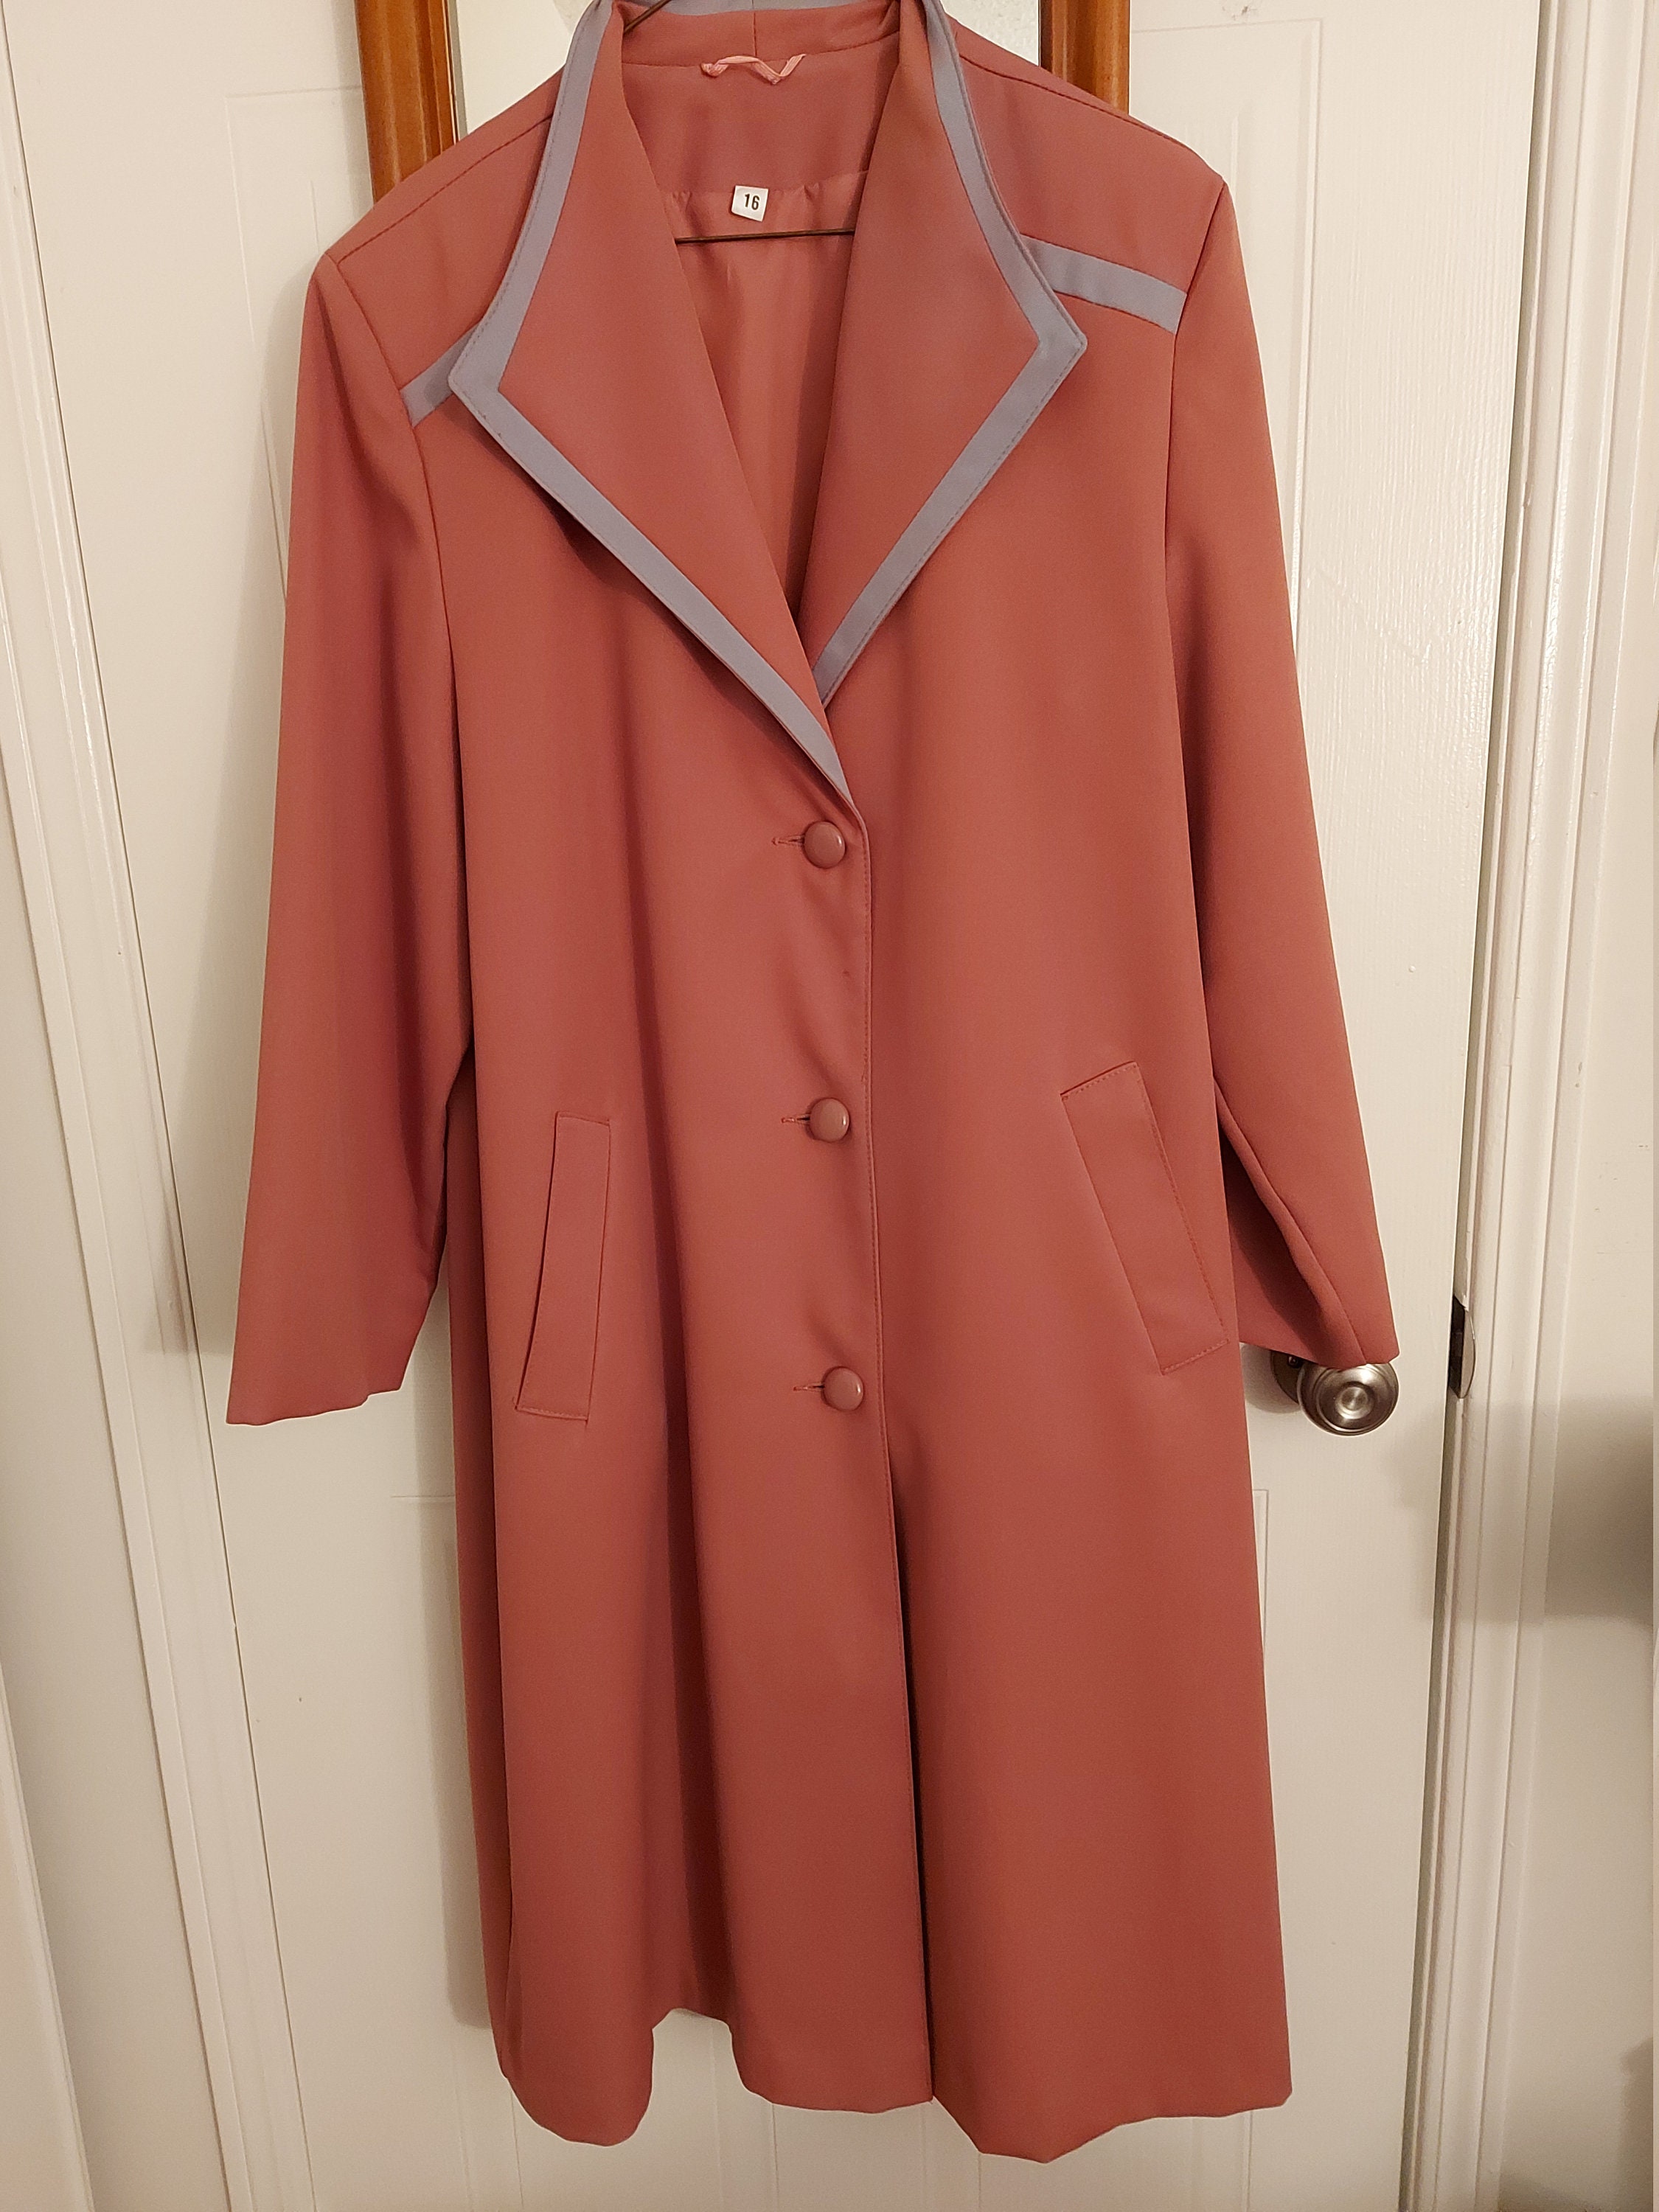 Vintage Talbots Reversible Trench Coat Size 16 